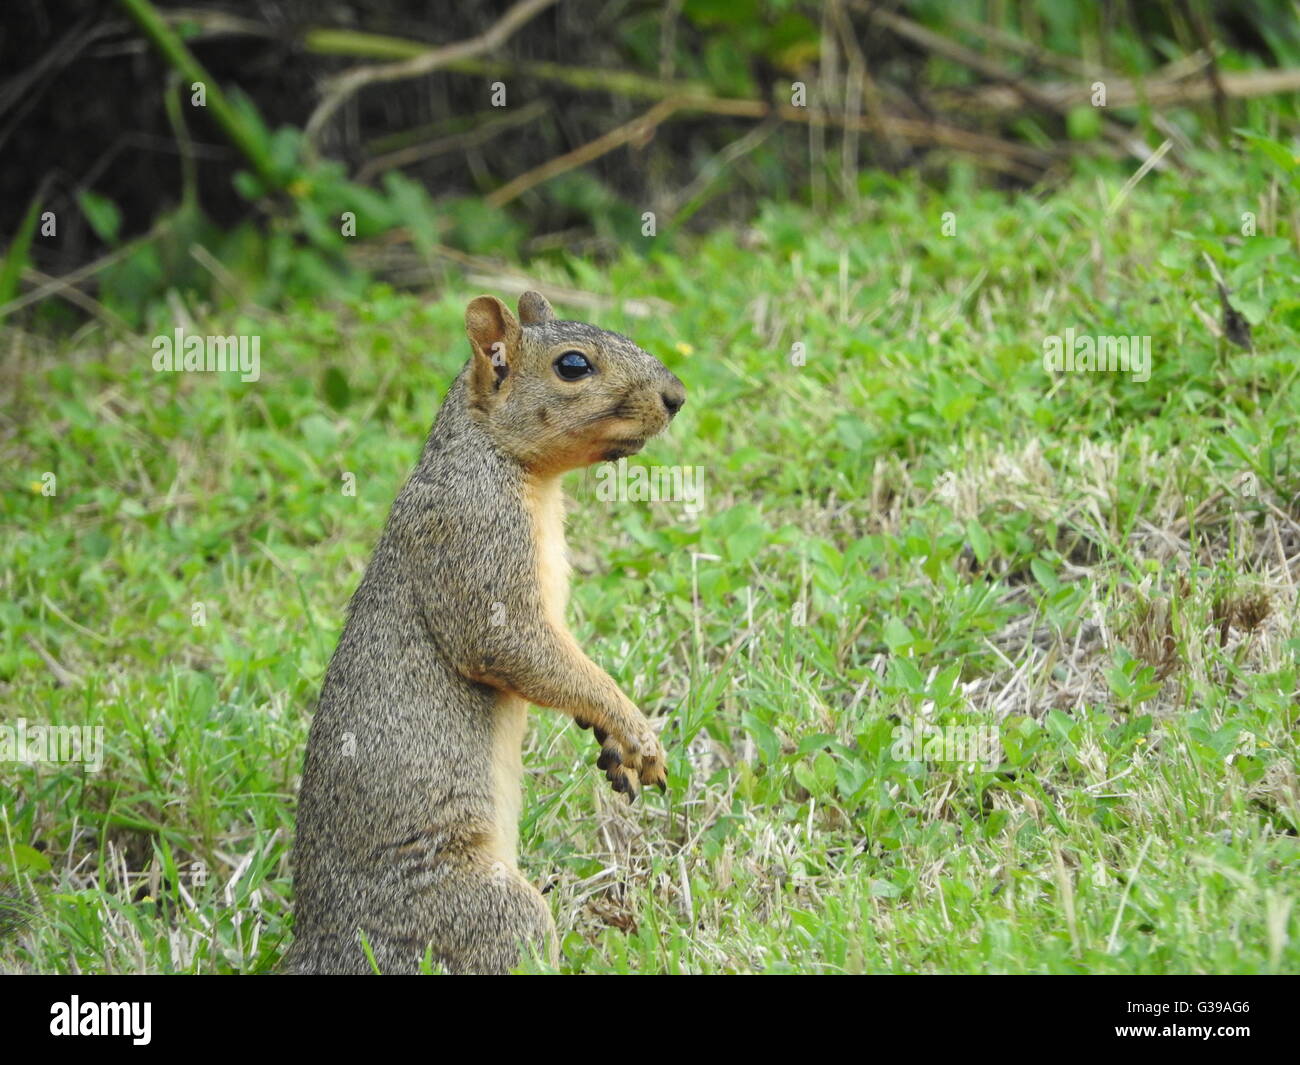 A fox squirrel (Sciurus niger) stands on his or her back legs in a patch of grass. Stock Photo